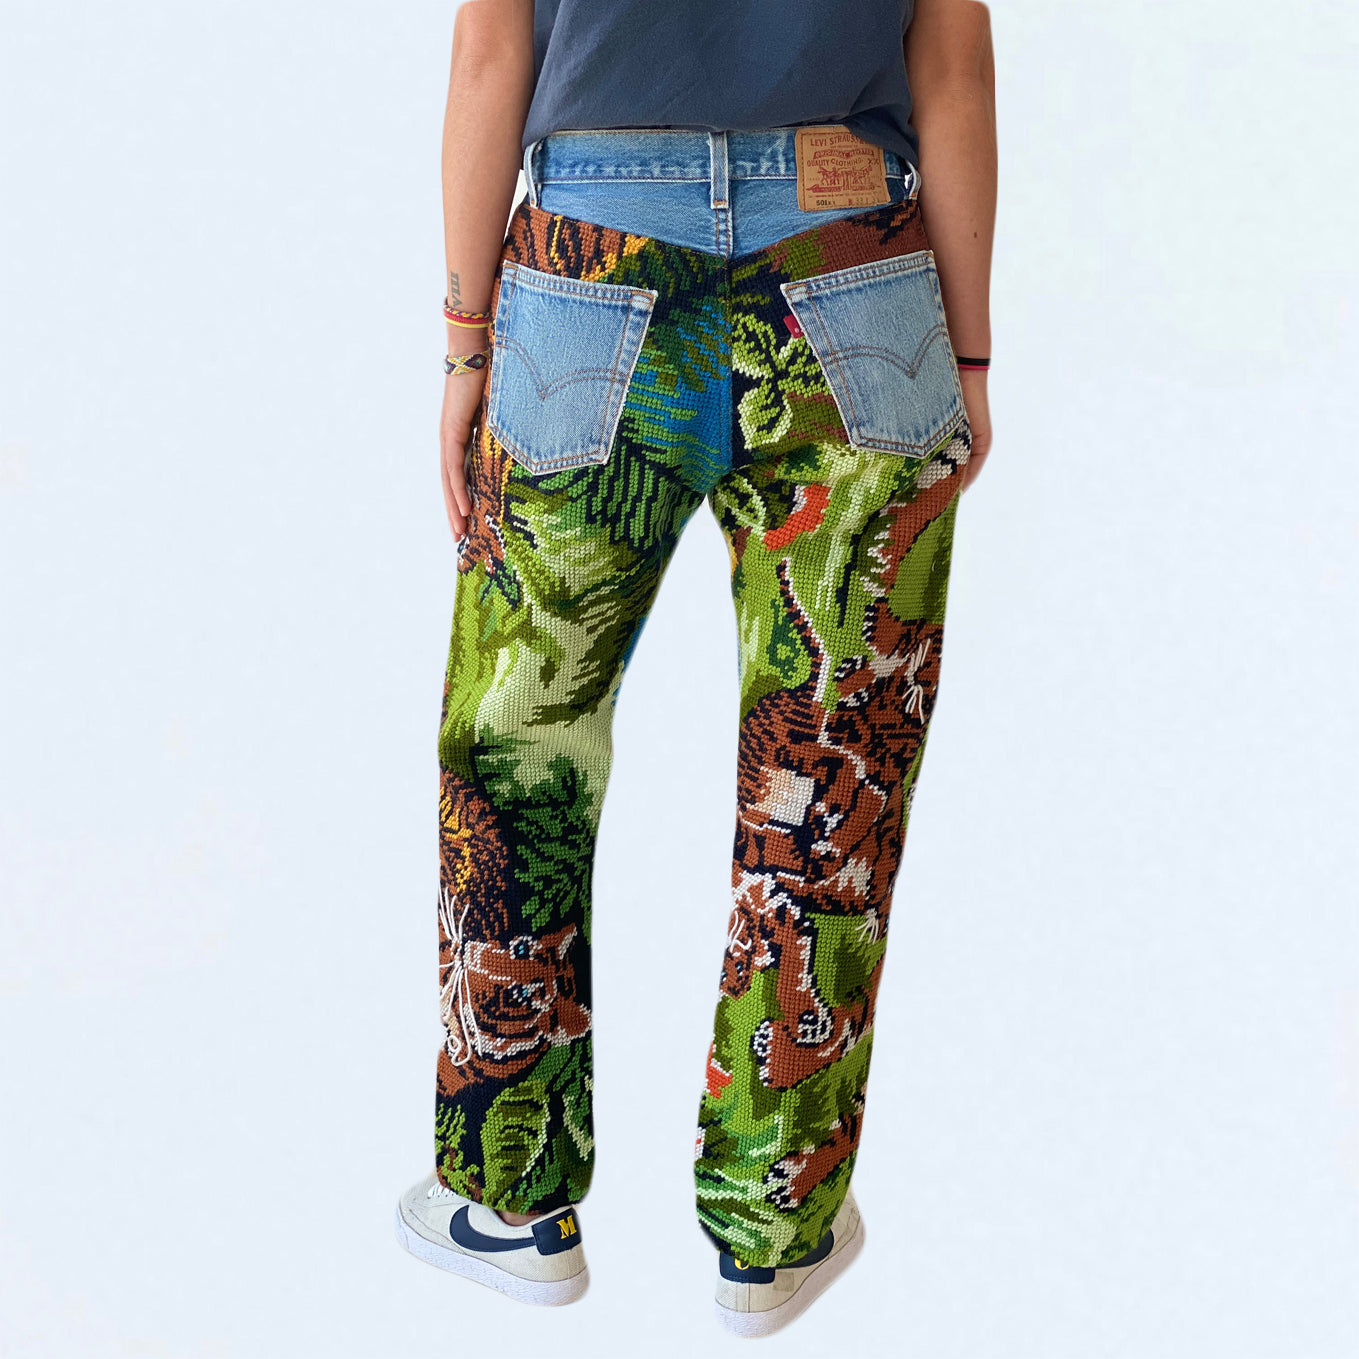 Tiger 2 Embroidery Jeans